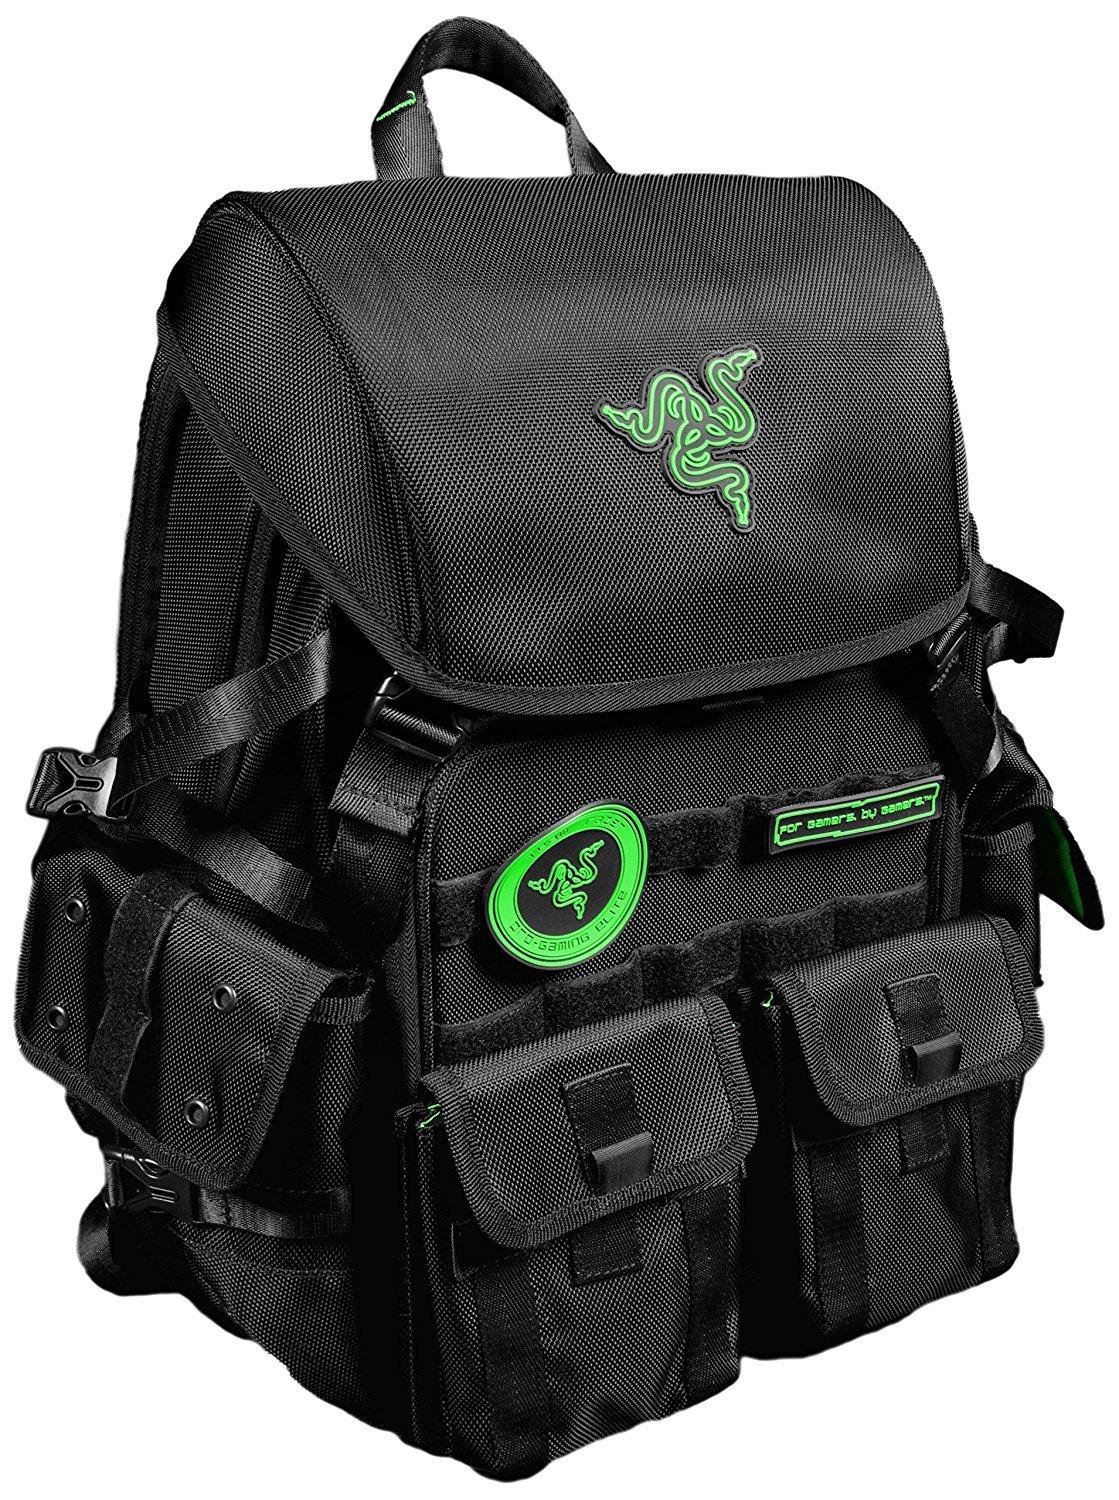 Razer Tactical Pro Backpack With Diverse Multipurpose Compartments